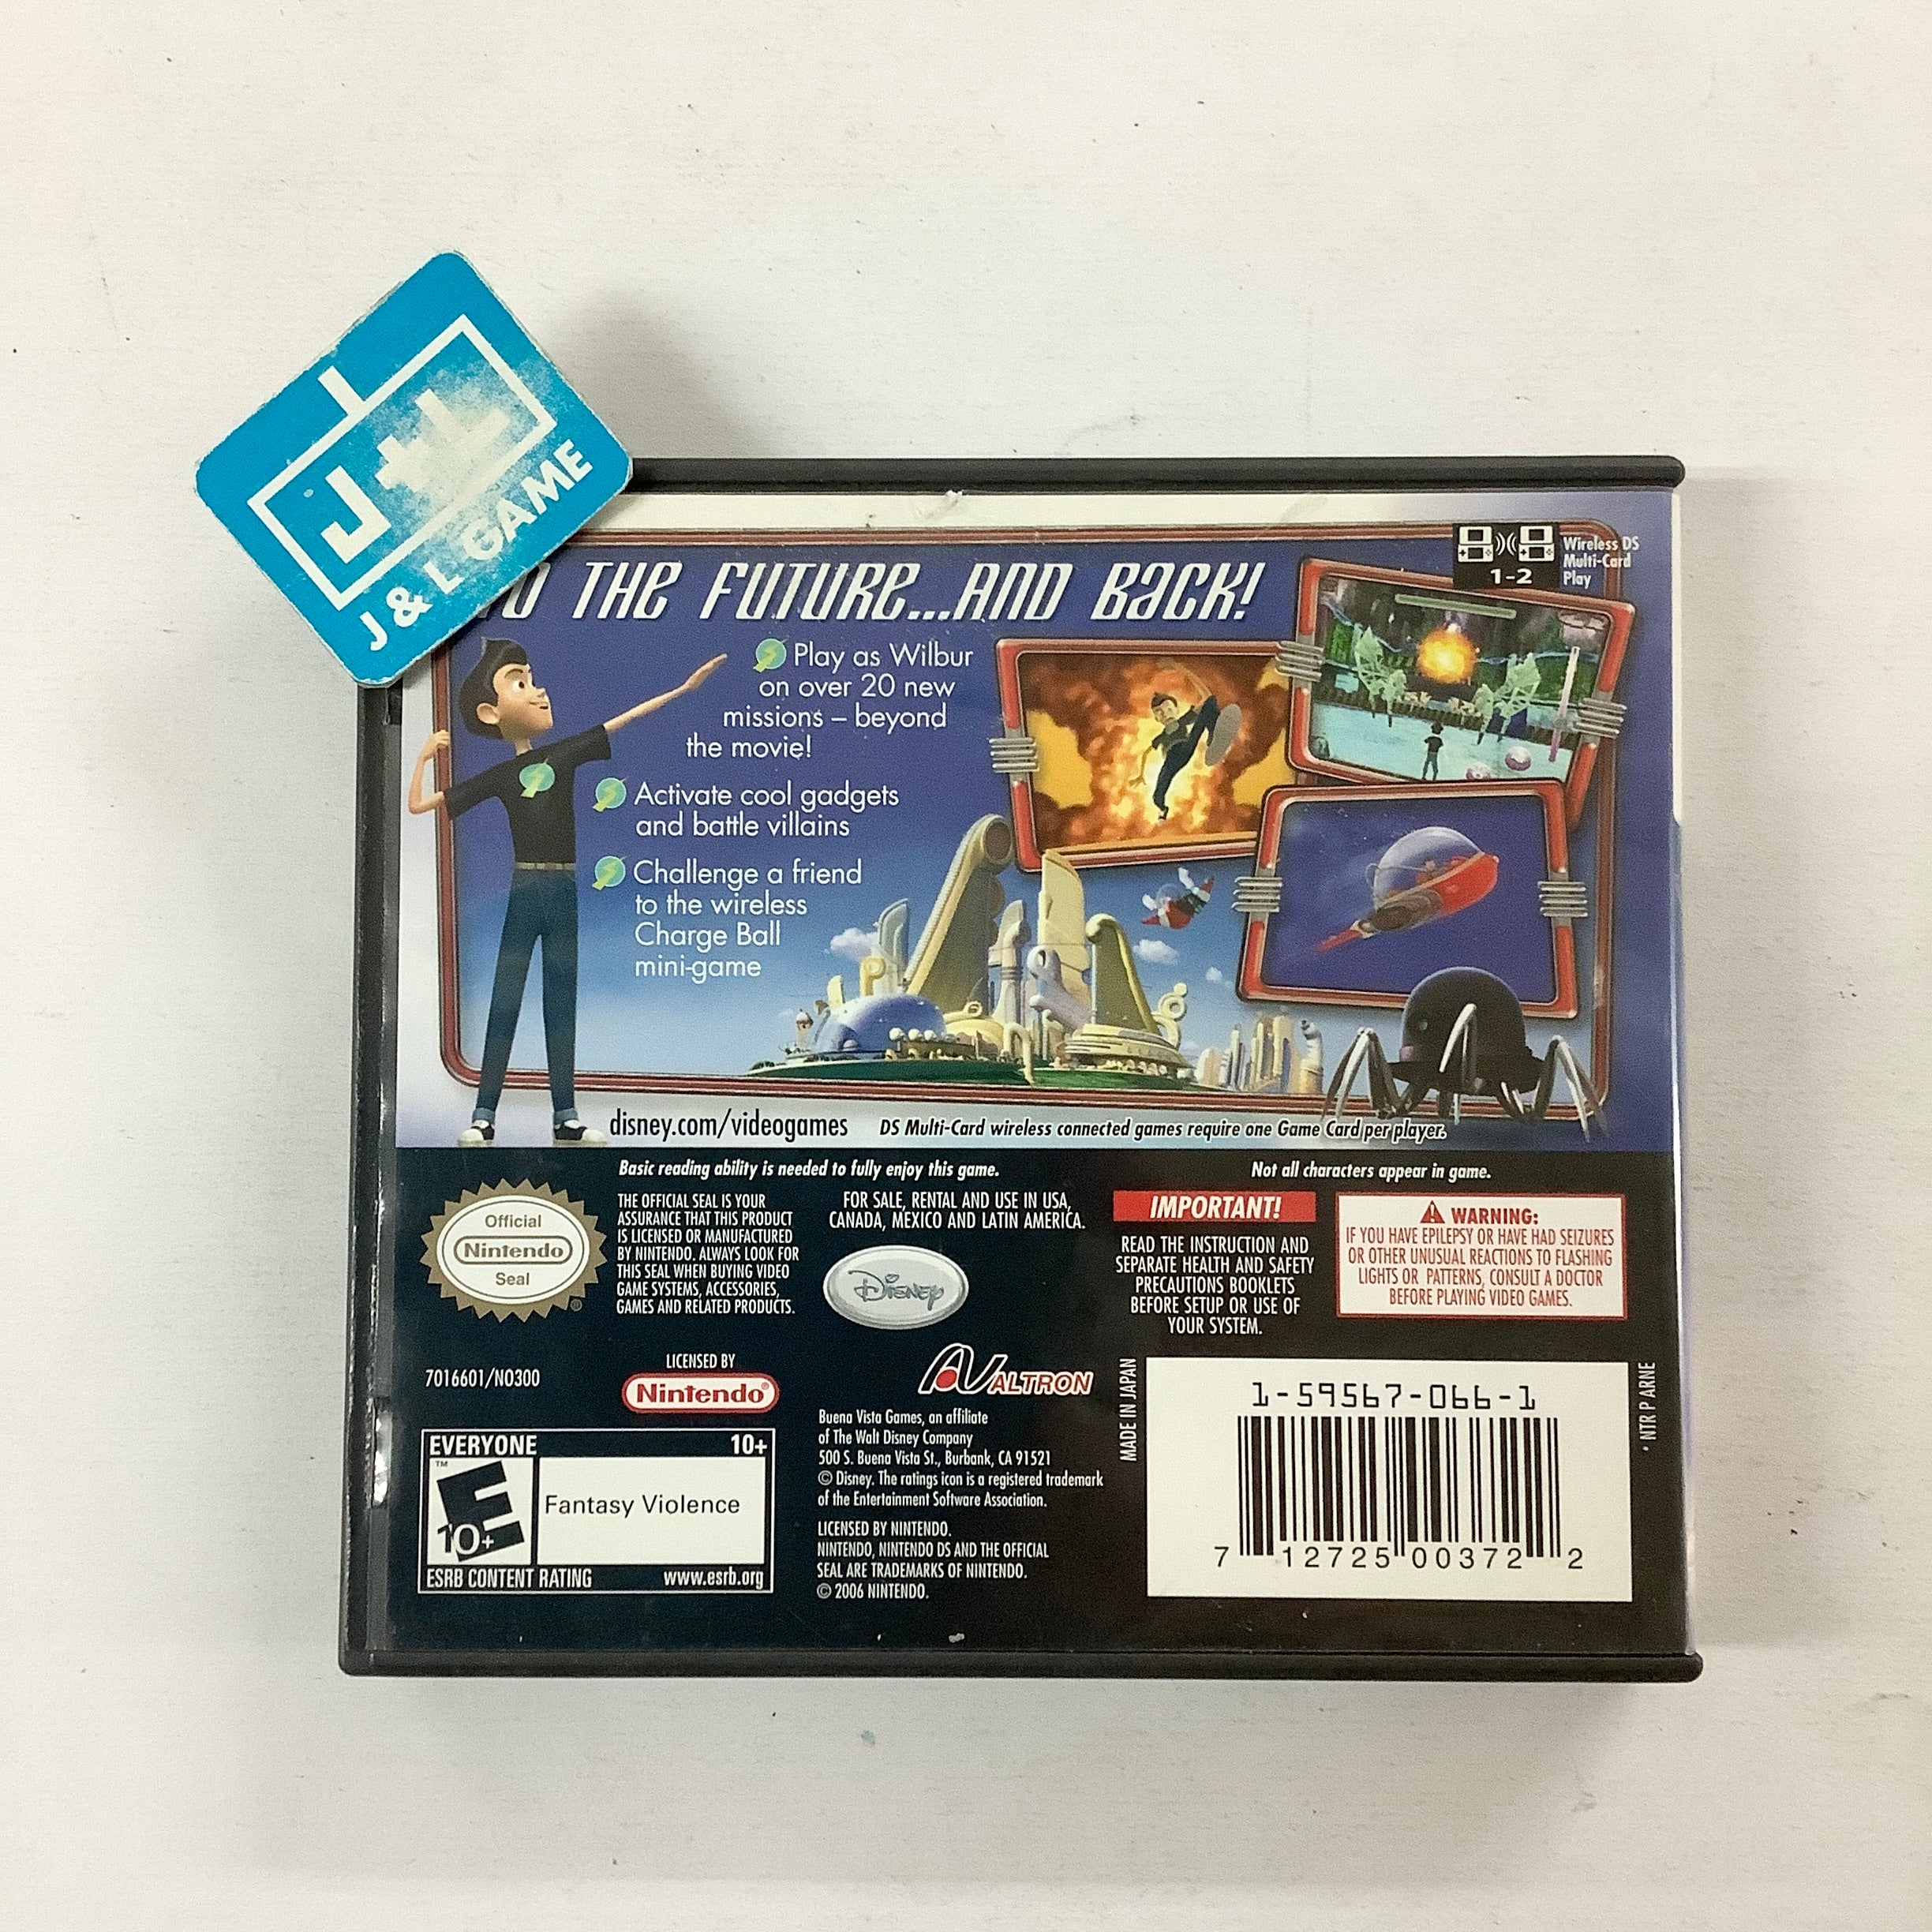 Disney's Meet the Robinsons - (NDS) Nintendo DS [Pre-Owned] Video Games Disney Interactive Studios   